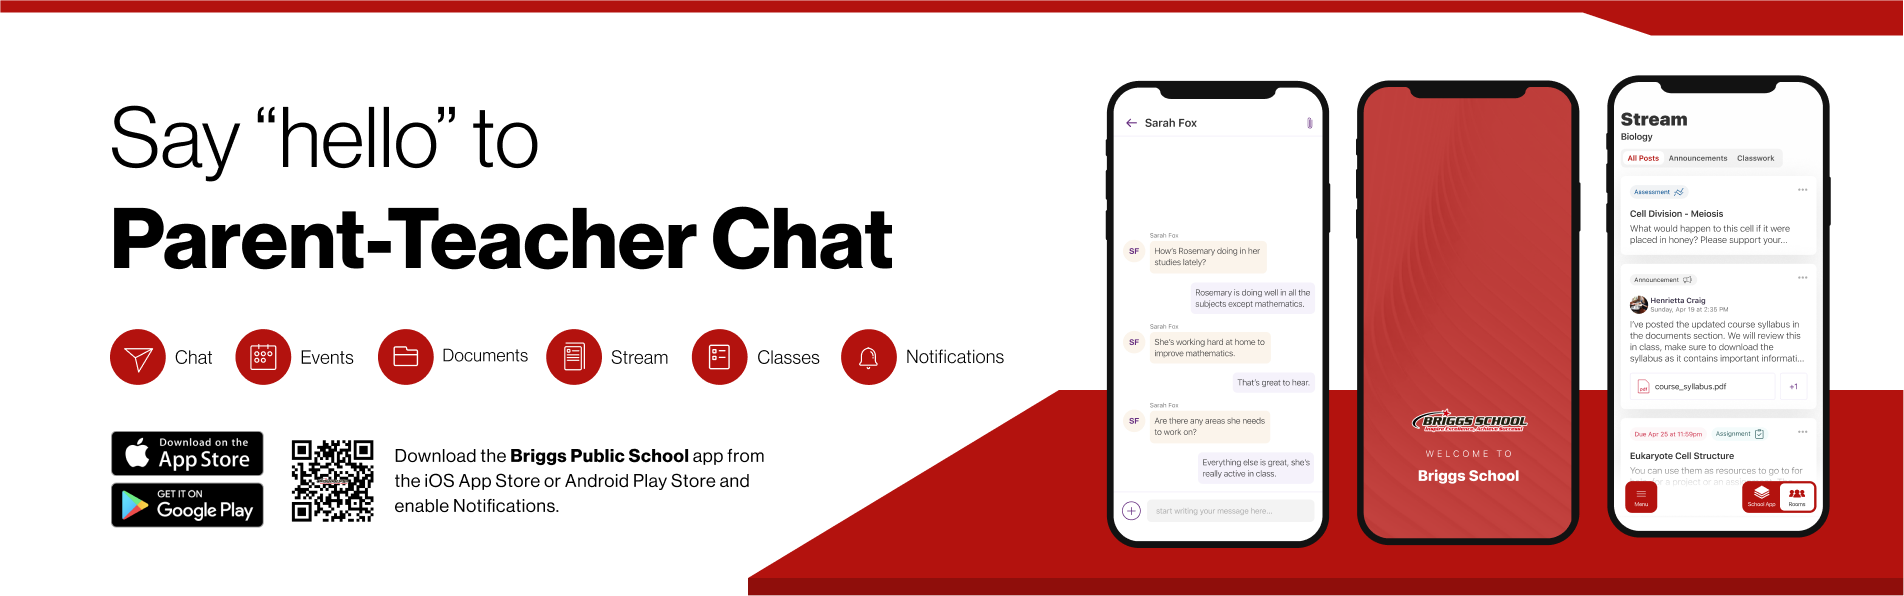 Say hello to Parent-Teacher chat in the new Rooms app. Download the Briggs School app in the Google Play or Apple App store.